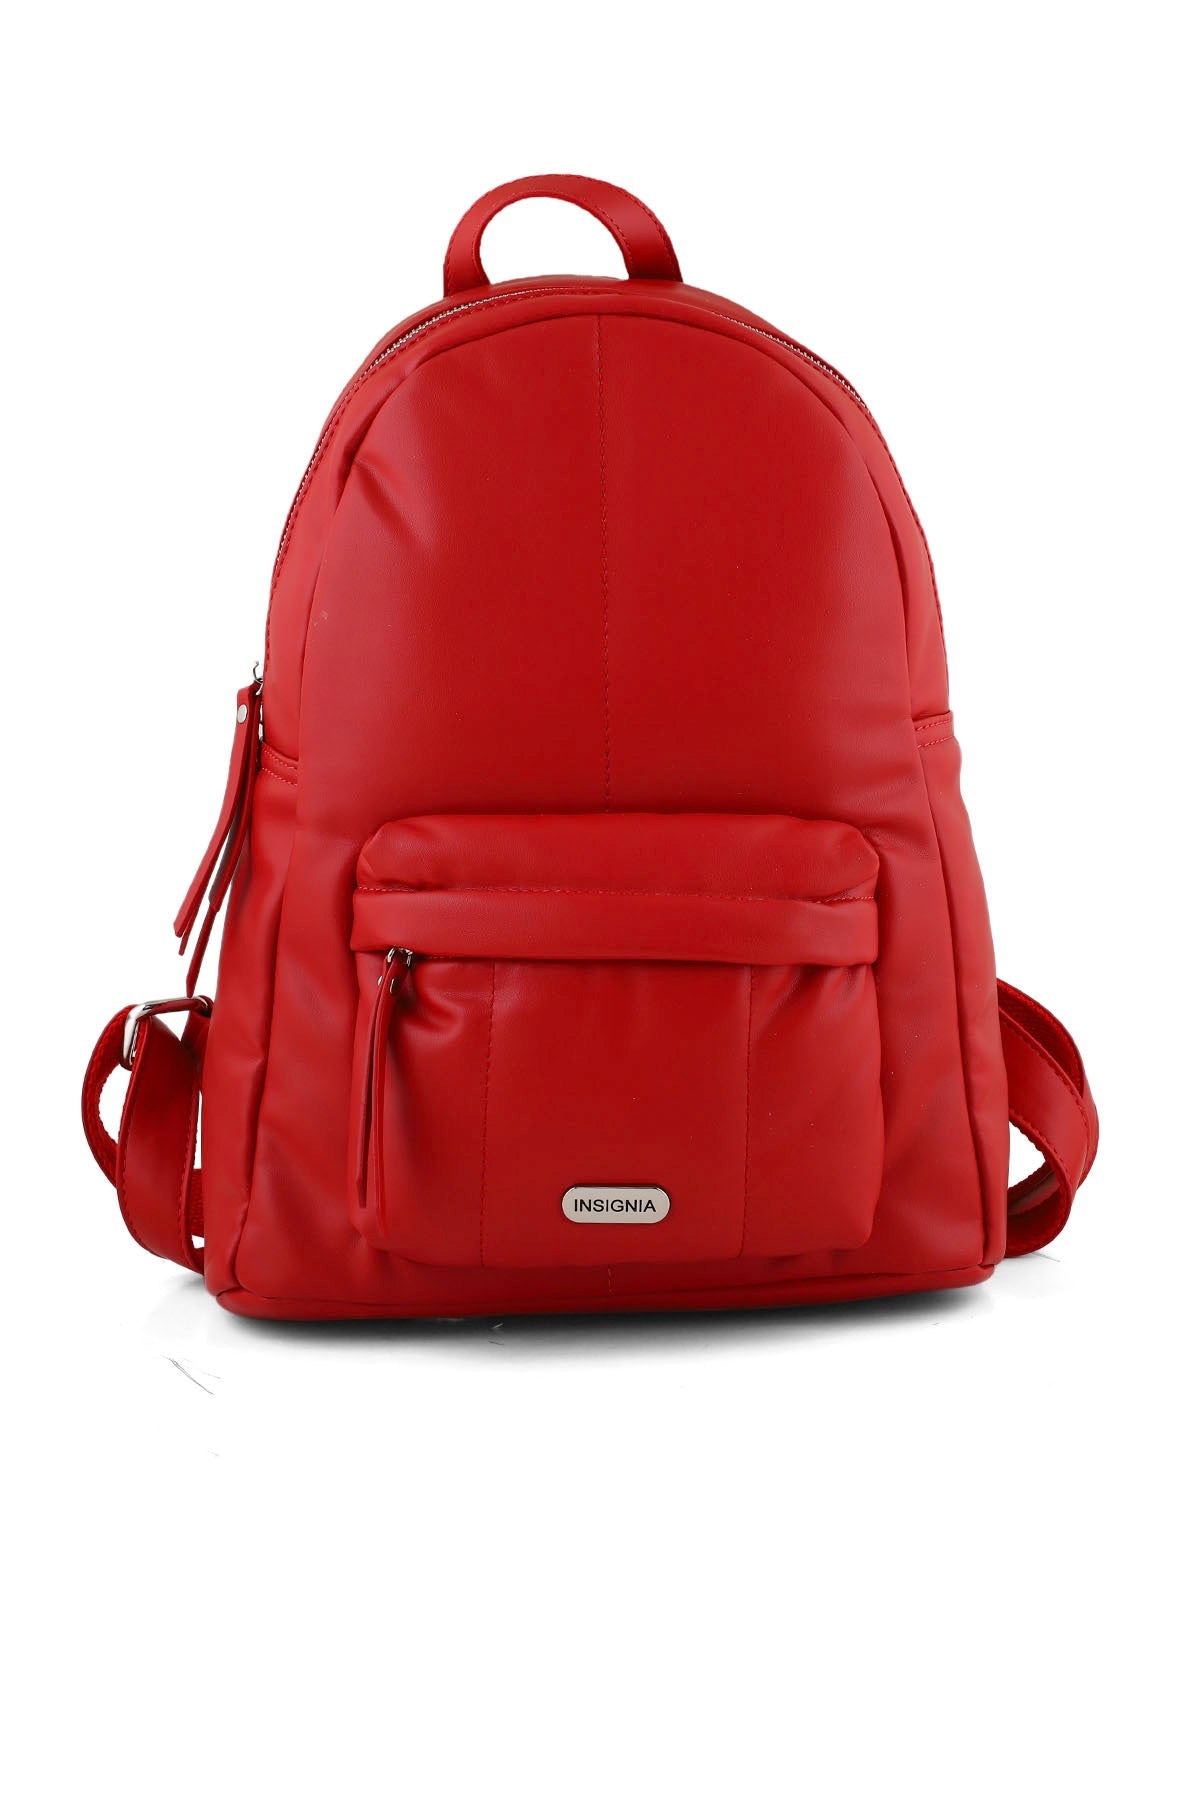 Backpack B15019-Red